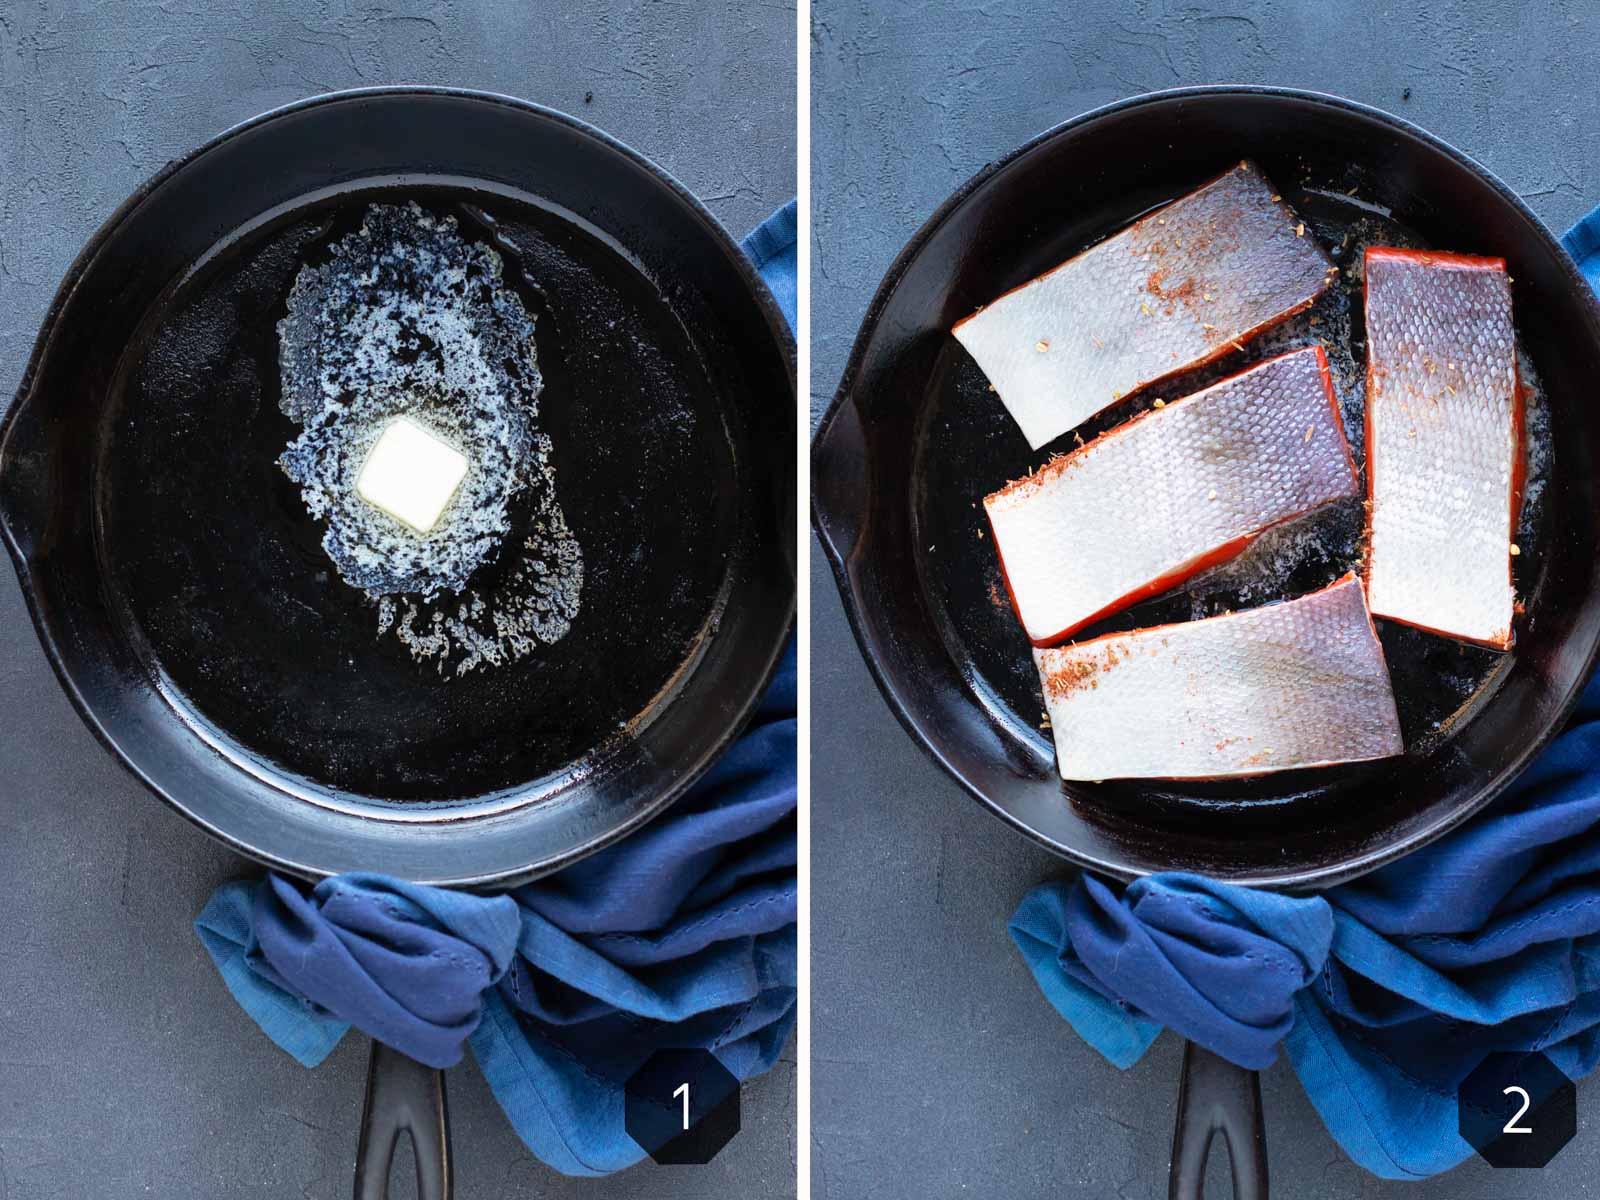 Blackened salmon being cooked in a cast iron skillet with butter.